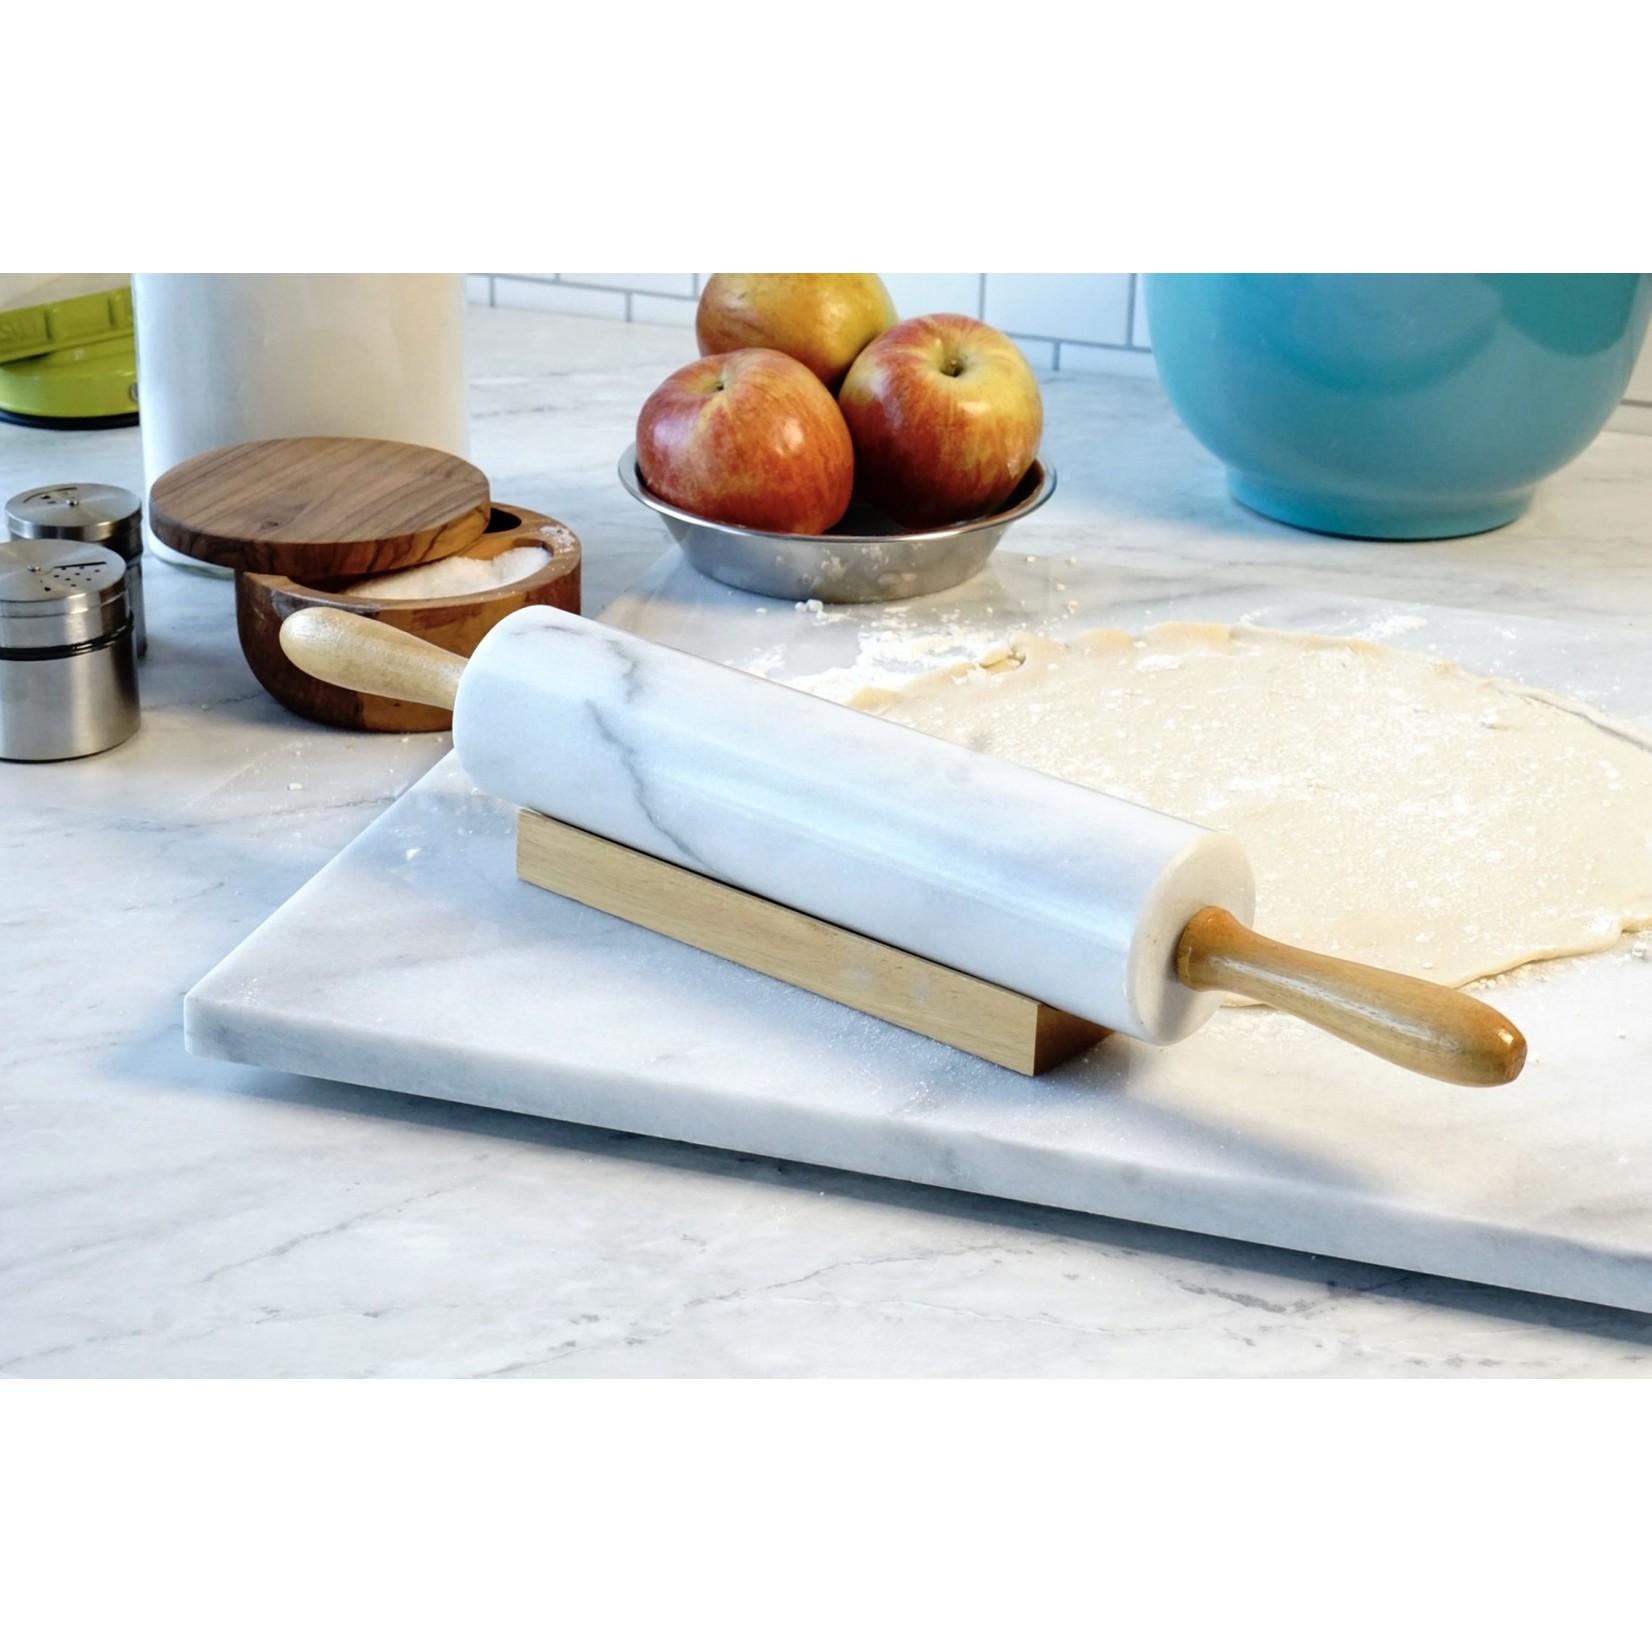 RSVP RSVP Marble Rolling Pin with Base - White DNR